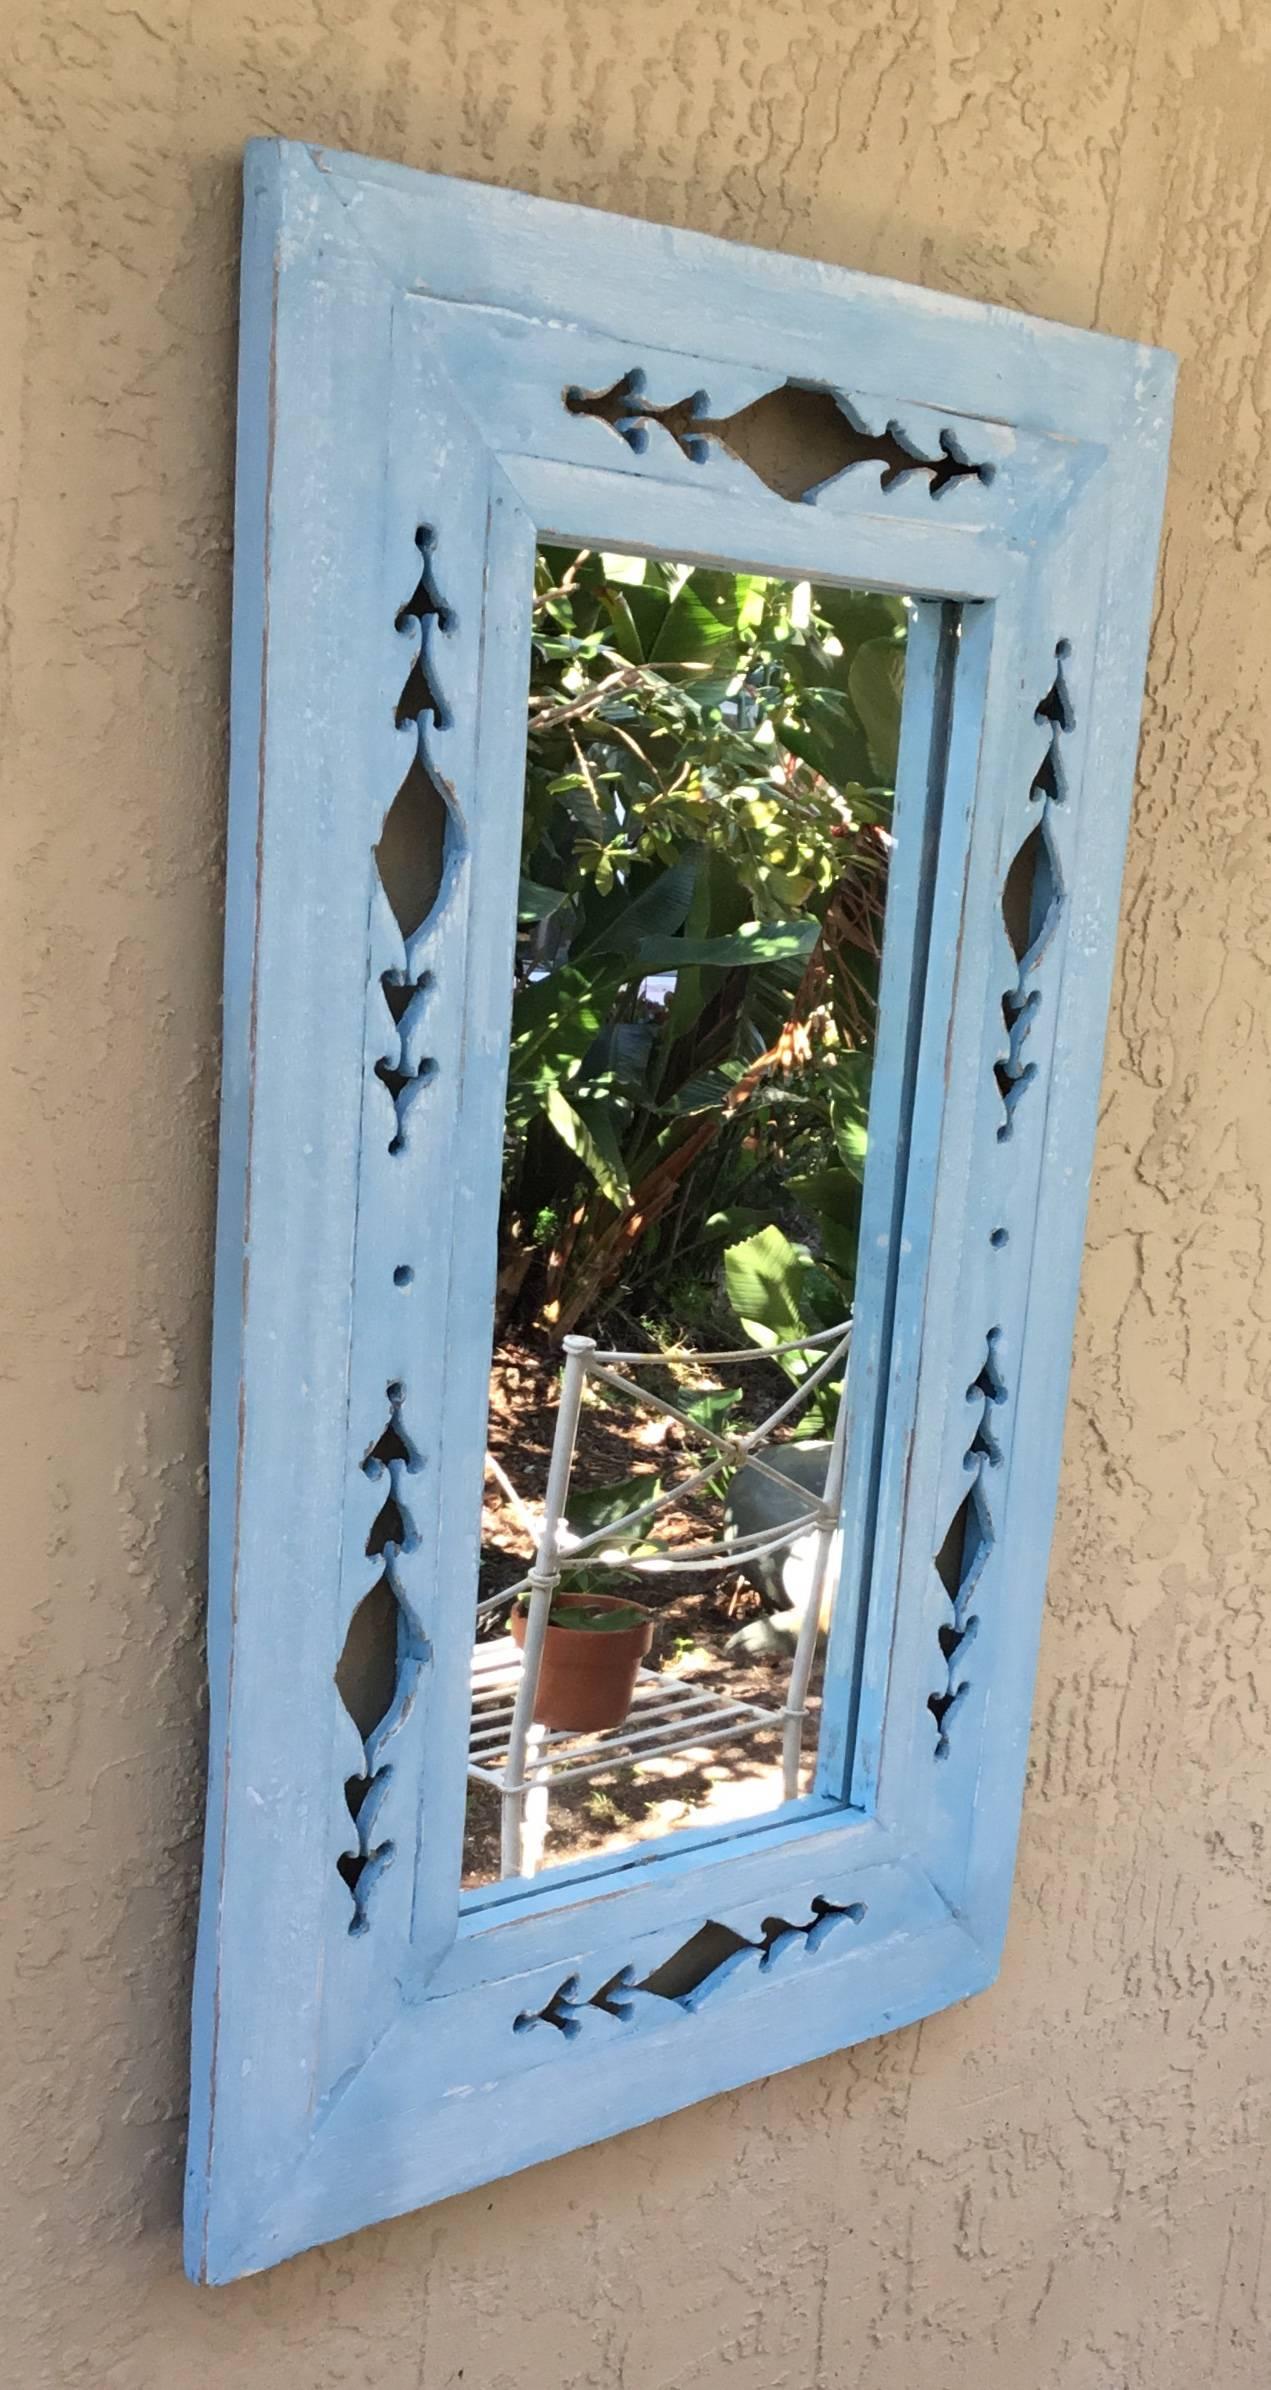 Fantastic wood mirror artistically hand carve with repeated hearts motifs all around and painted with flat light blue-turquoise color. Great decorative wall hanging.
Actual size: 12”.5 x 27”.
One more mirror available.